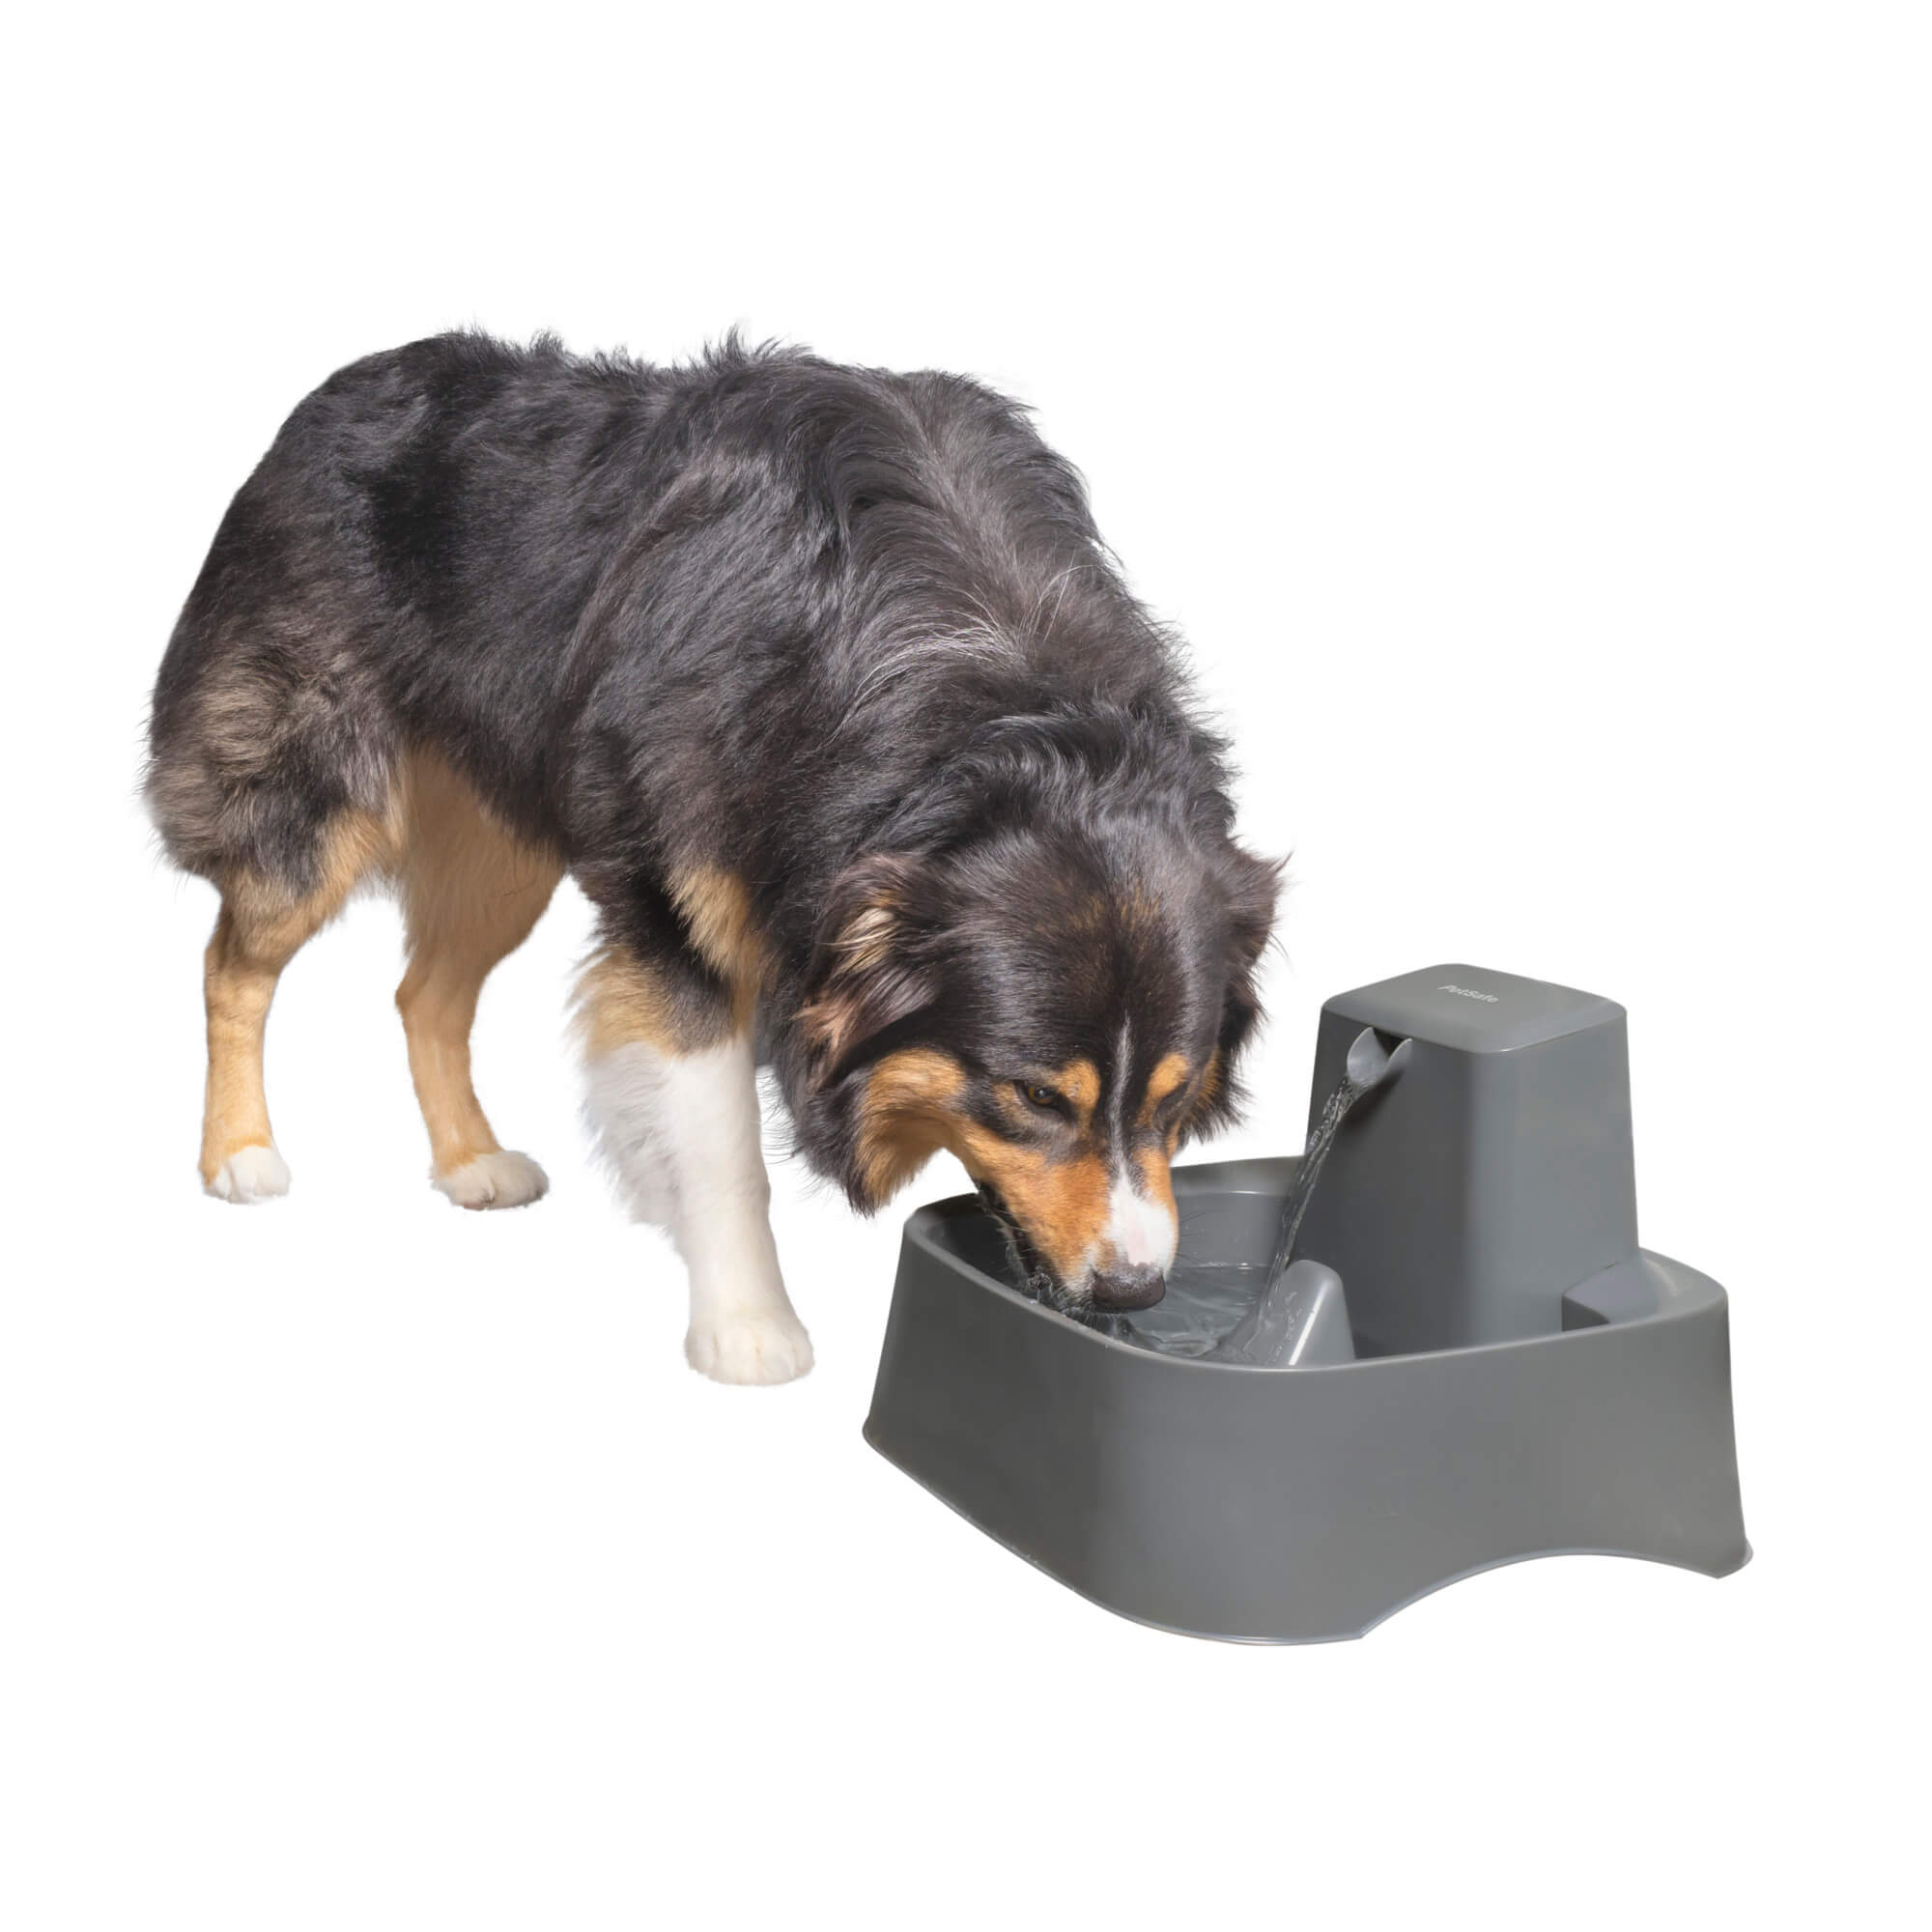 Dog drinking from drinkwell pet fountain - automatic waterer